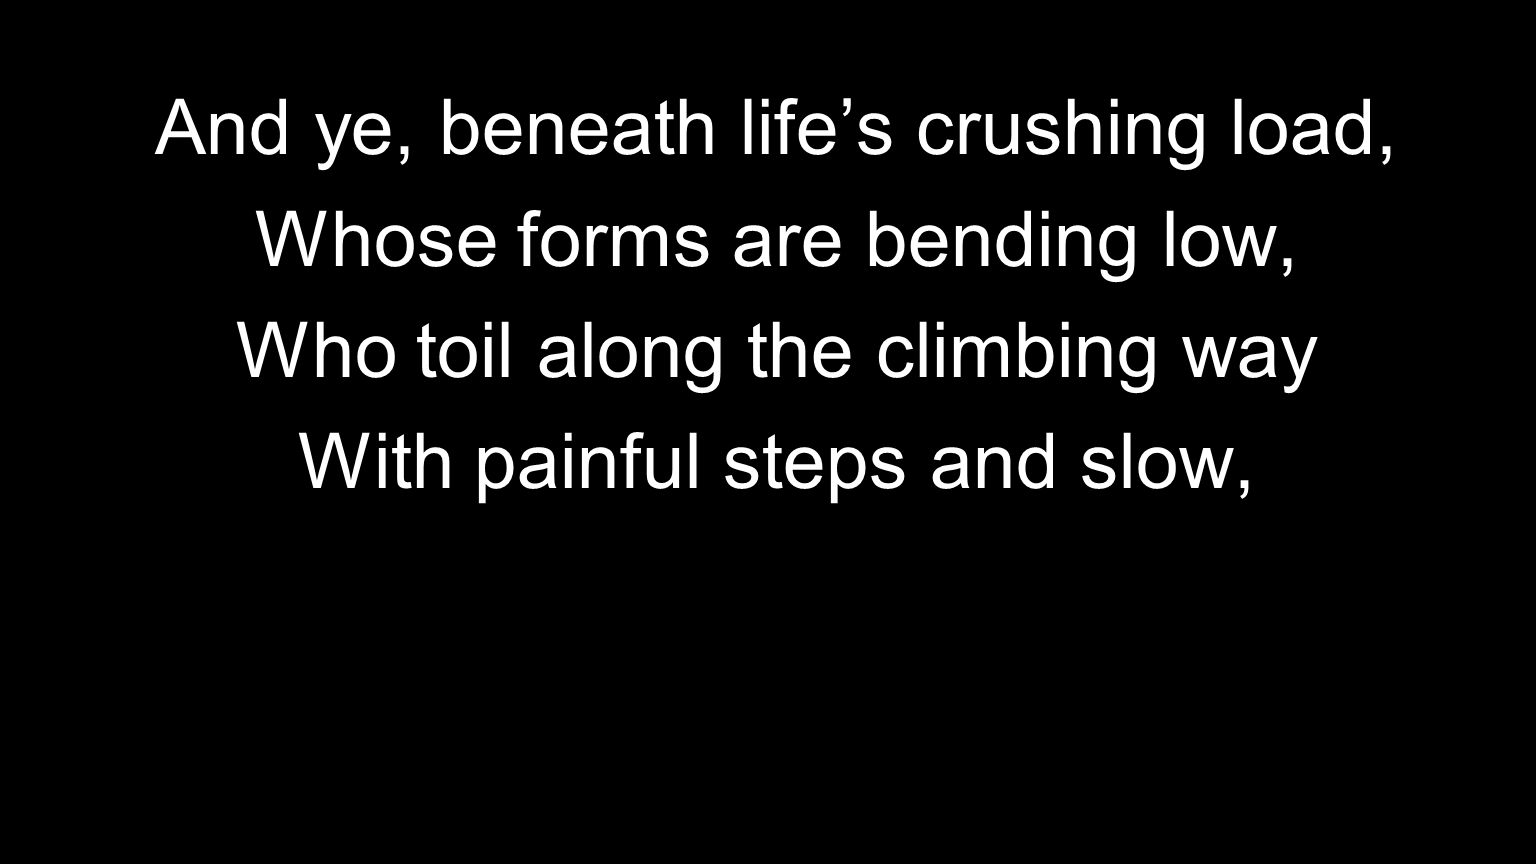 And ye, beneath life’s crushing load, Whose forms are bending low, Who toil along the climbing way With painful steps and slow,